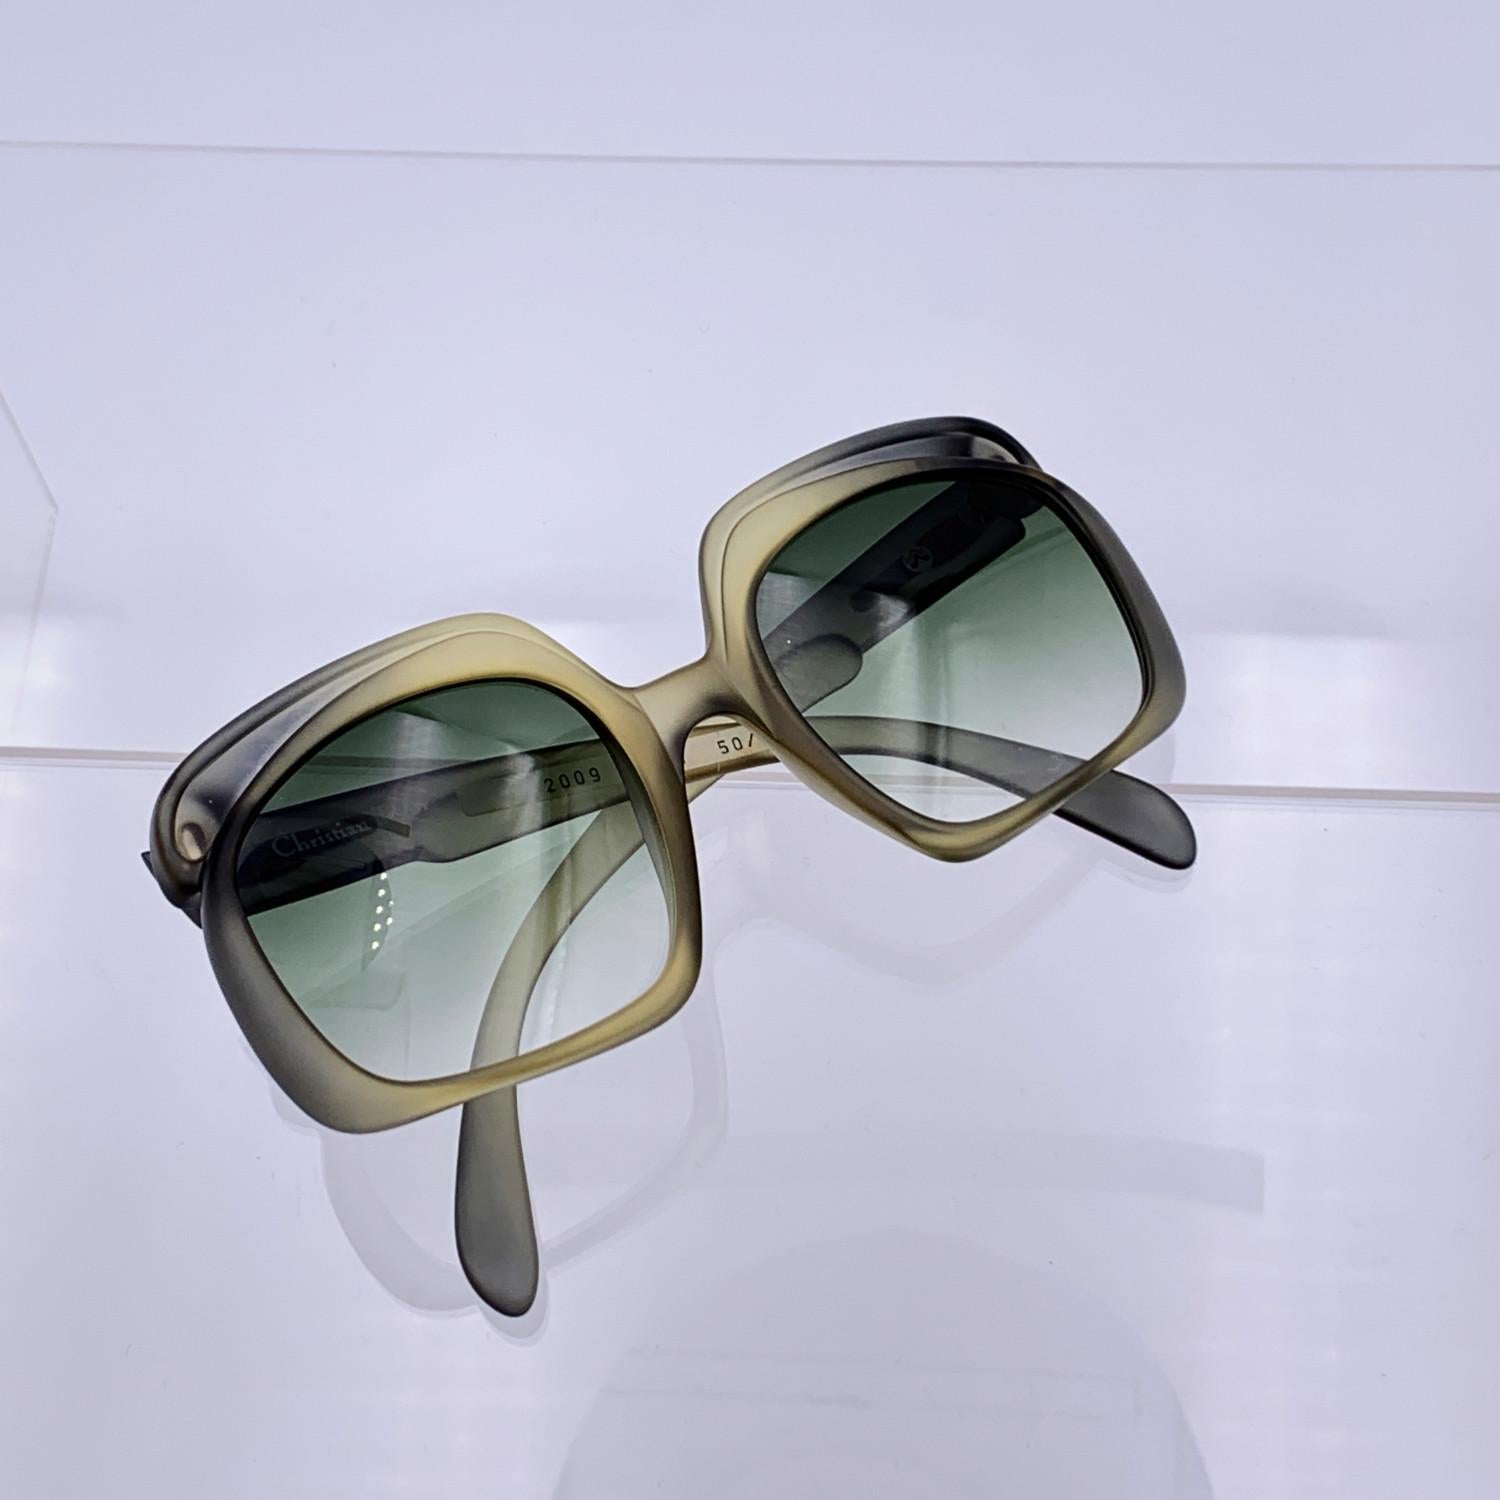 Vintage Christian Dior oversize sunglasses, Mod. 2009- Col D 571. Ombré green Optyl frame. Original 100% Total UVA/UVB protection in gradient green color. CD logo on temples. Made in Germany

Details

MATERIAL: Acetate

COLOR: Green

MODEL: 2009 -